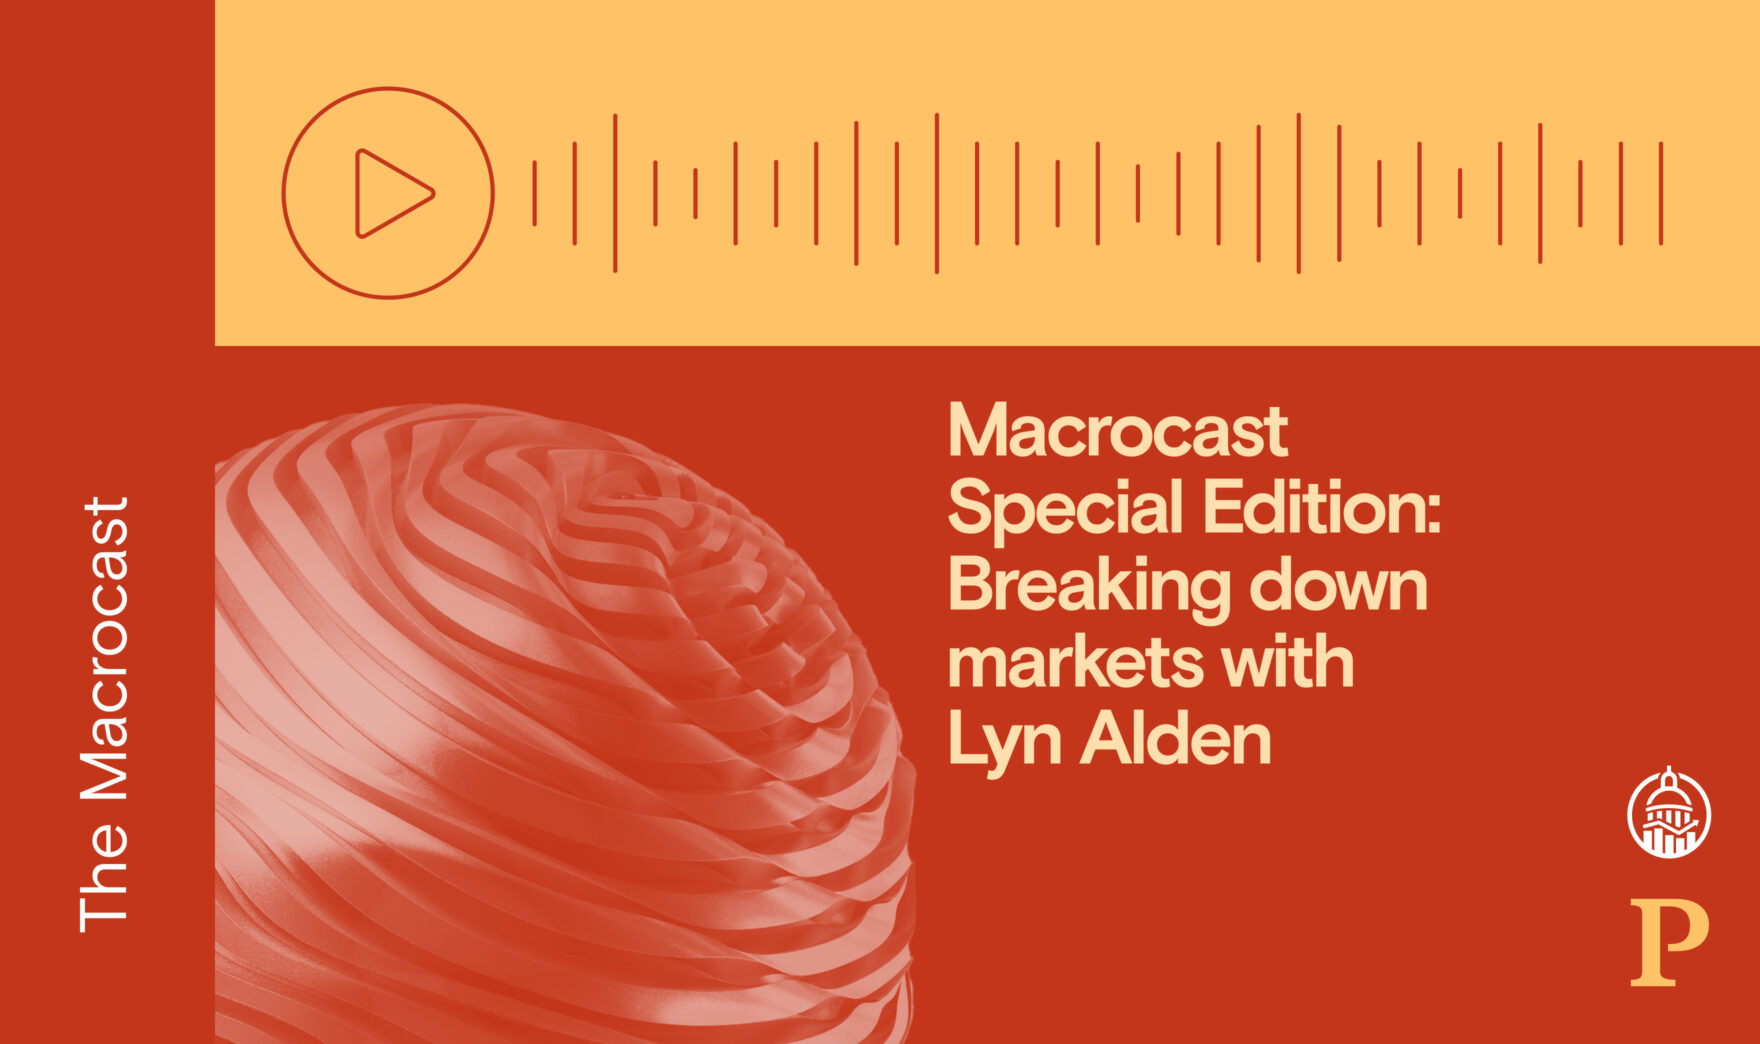 Macrocast Special Edition: Breaking down markets with Lyn Alden